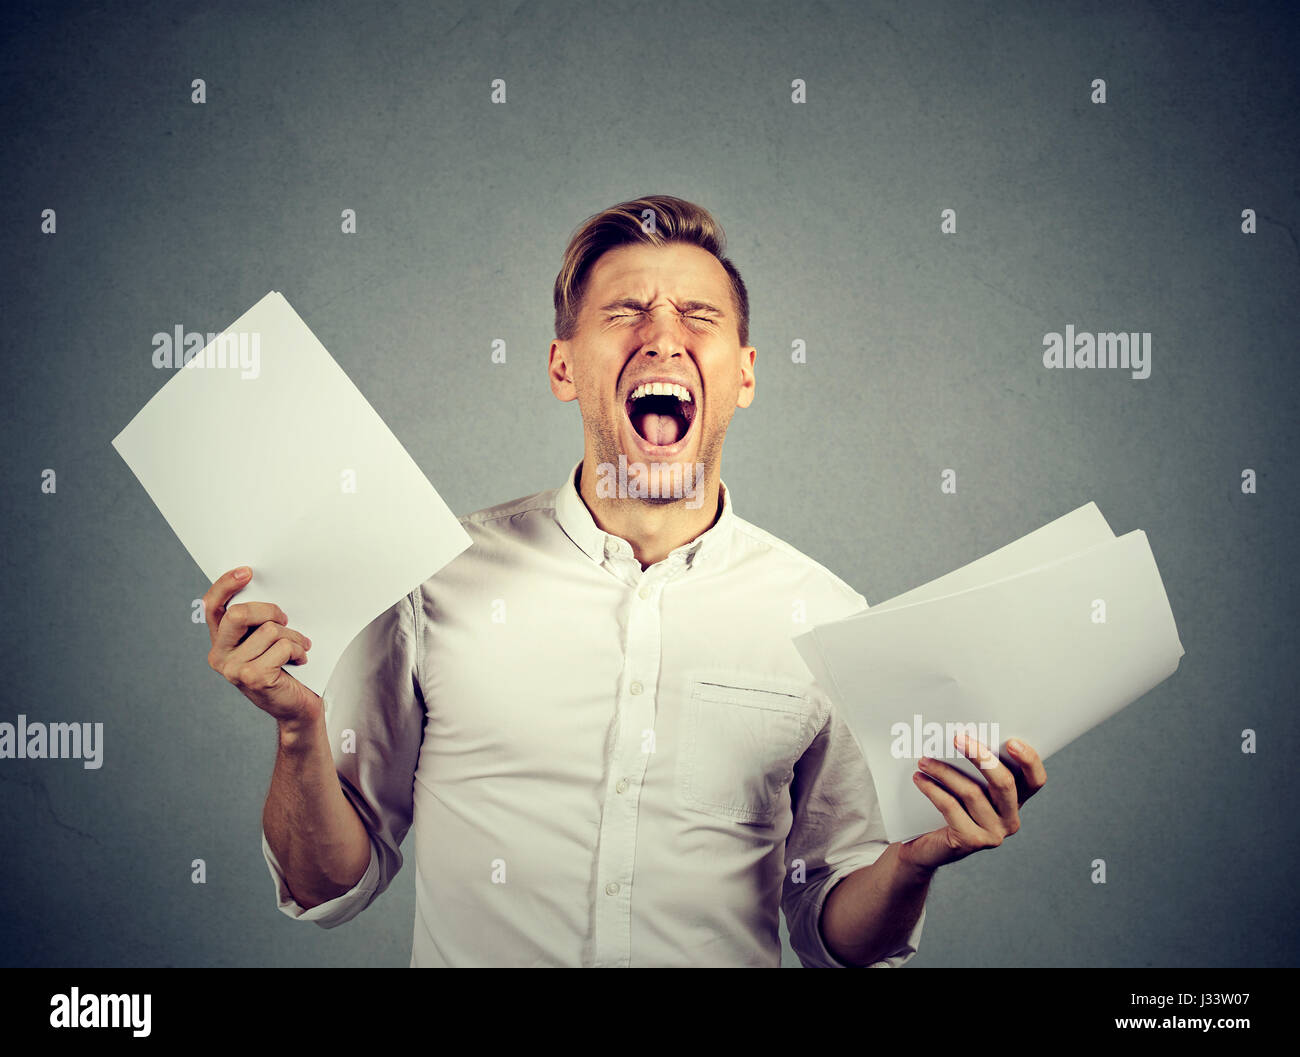 Angry stressed screaming business man with documents papers paperwork isolated on gray wall background. Negative emotions face expression Stock Photo